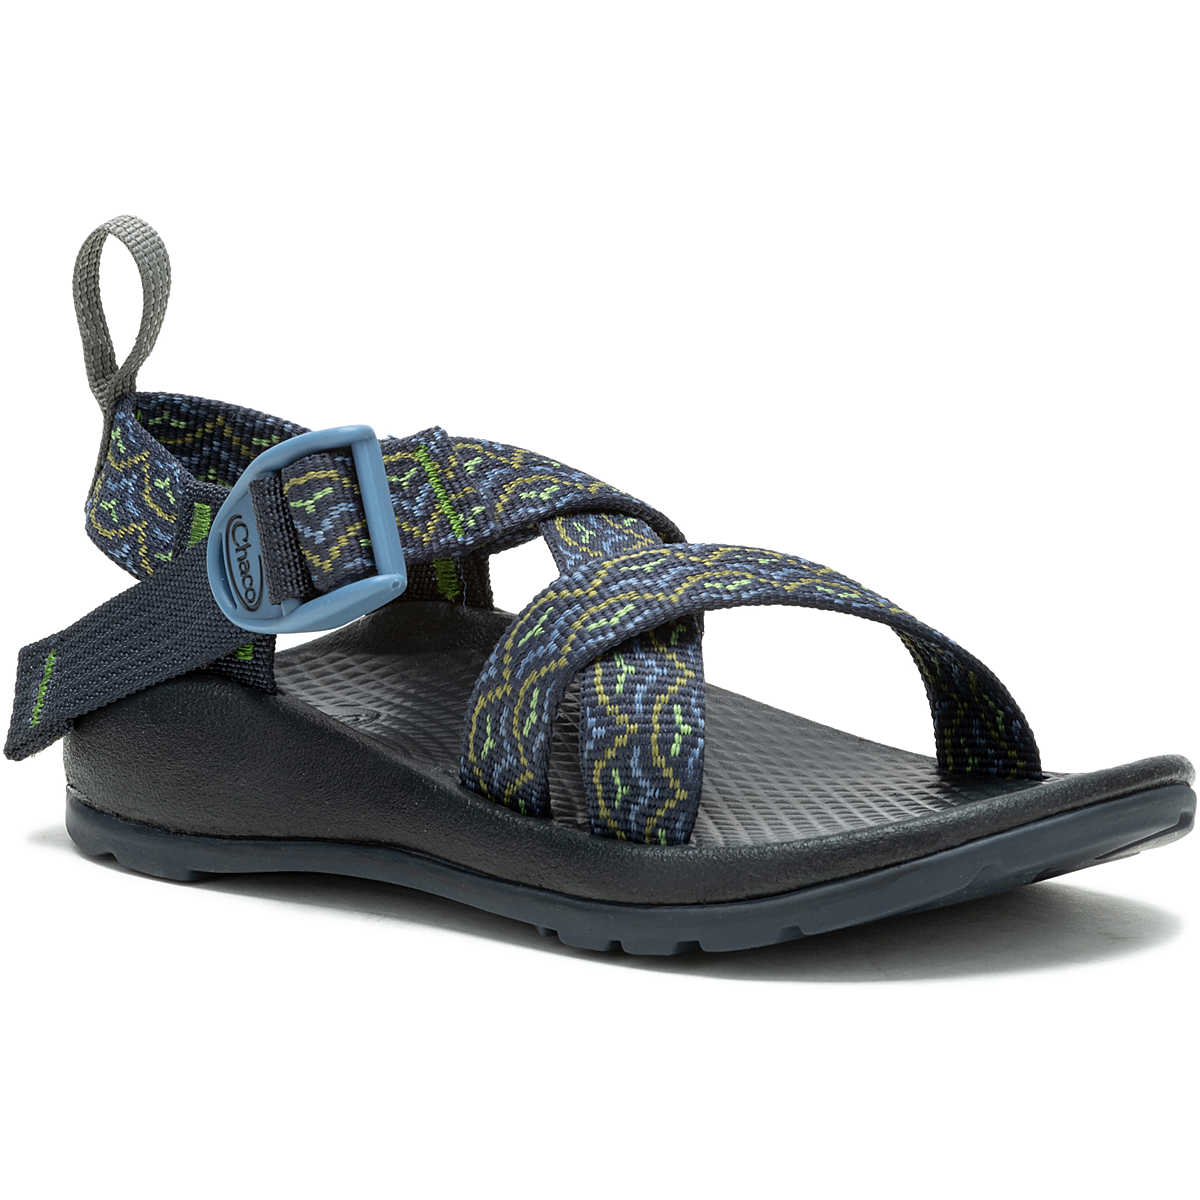 Kid's Z1 Ecotread Sandal by Chaco